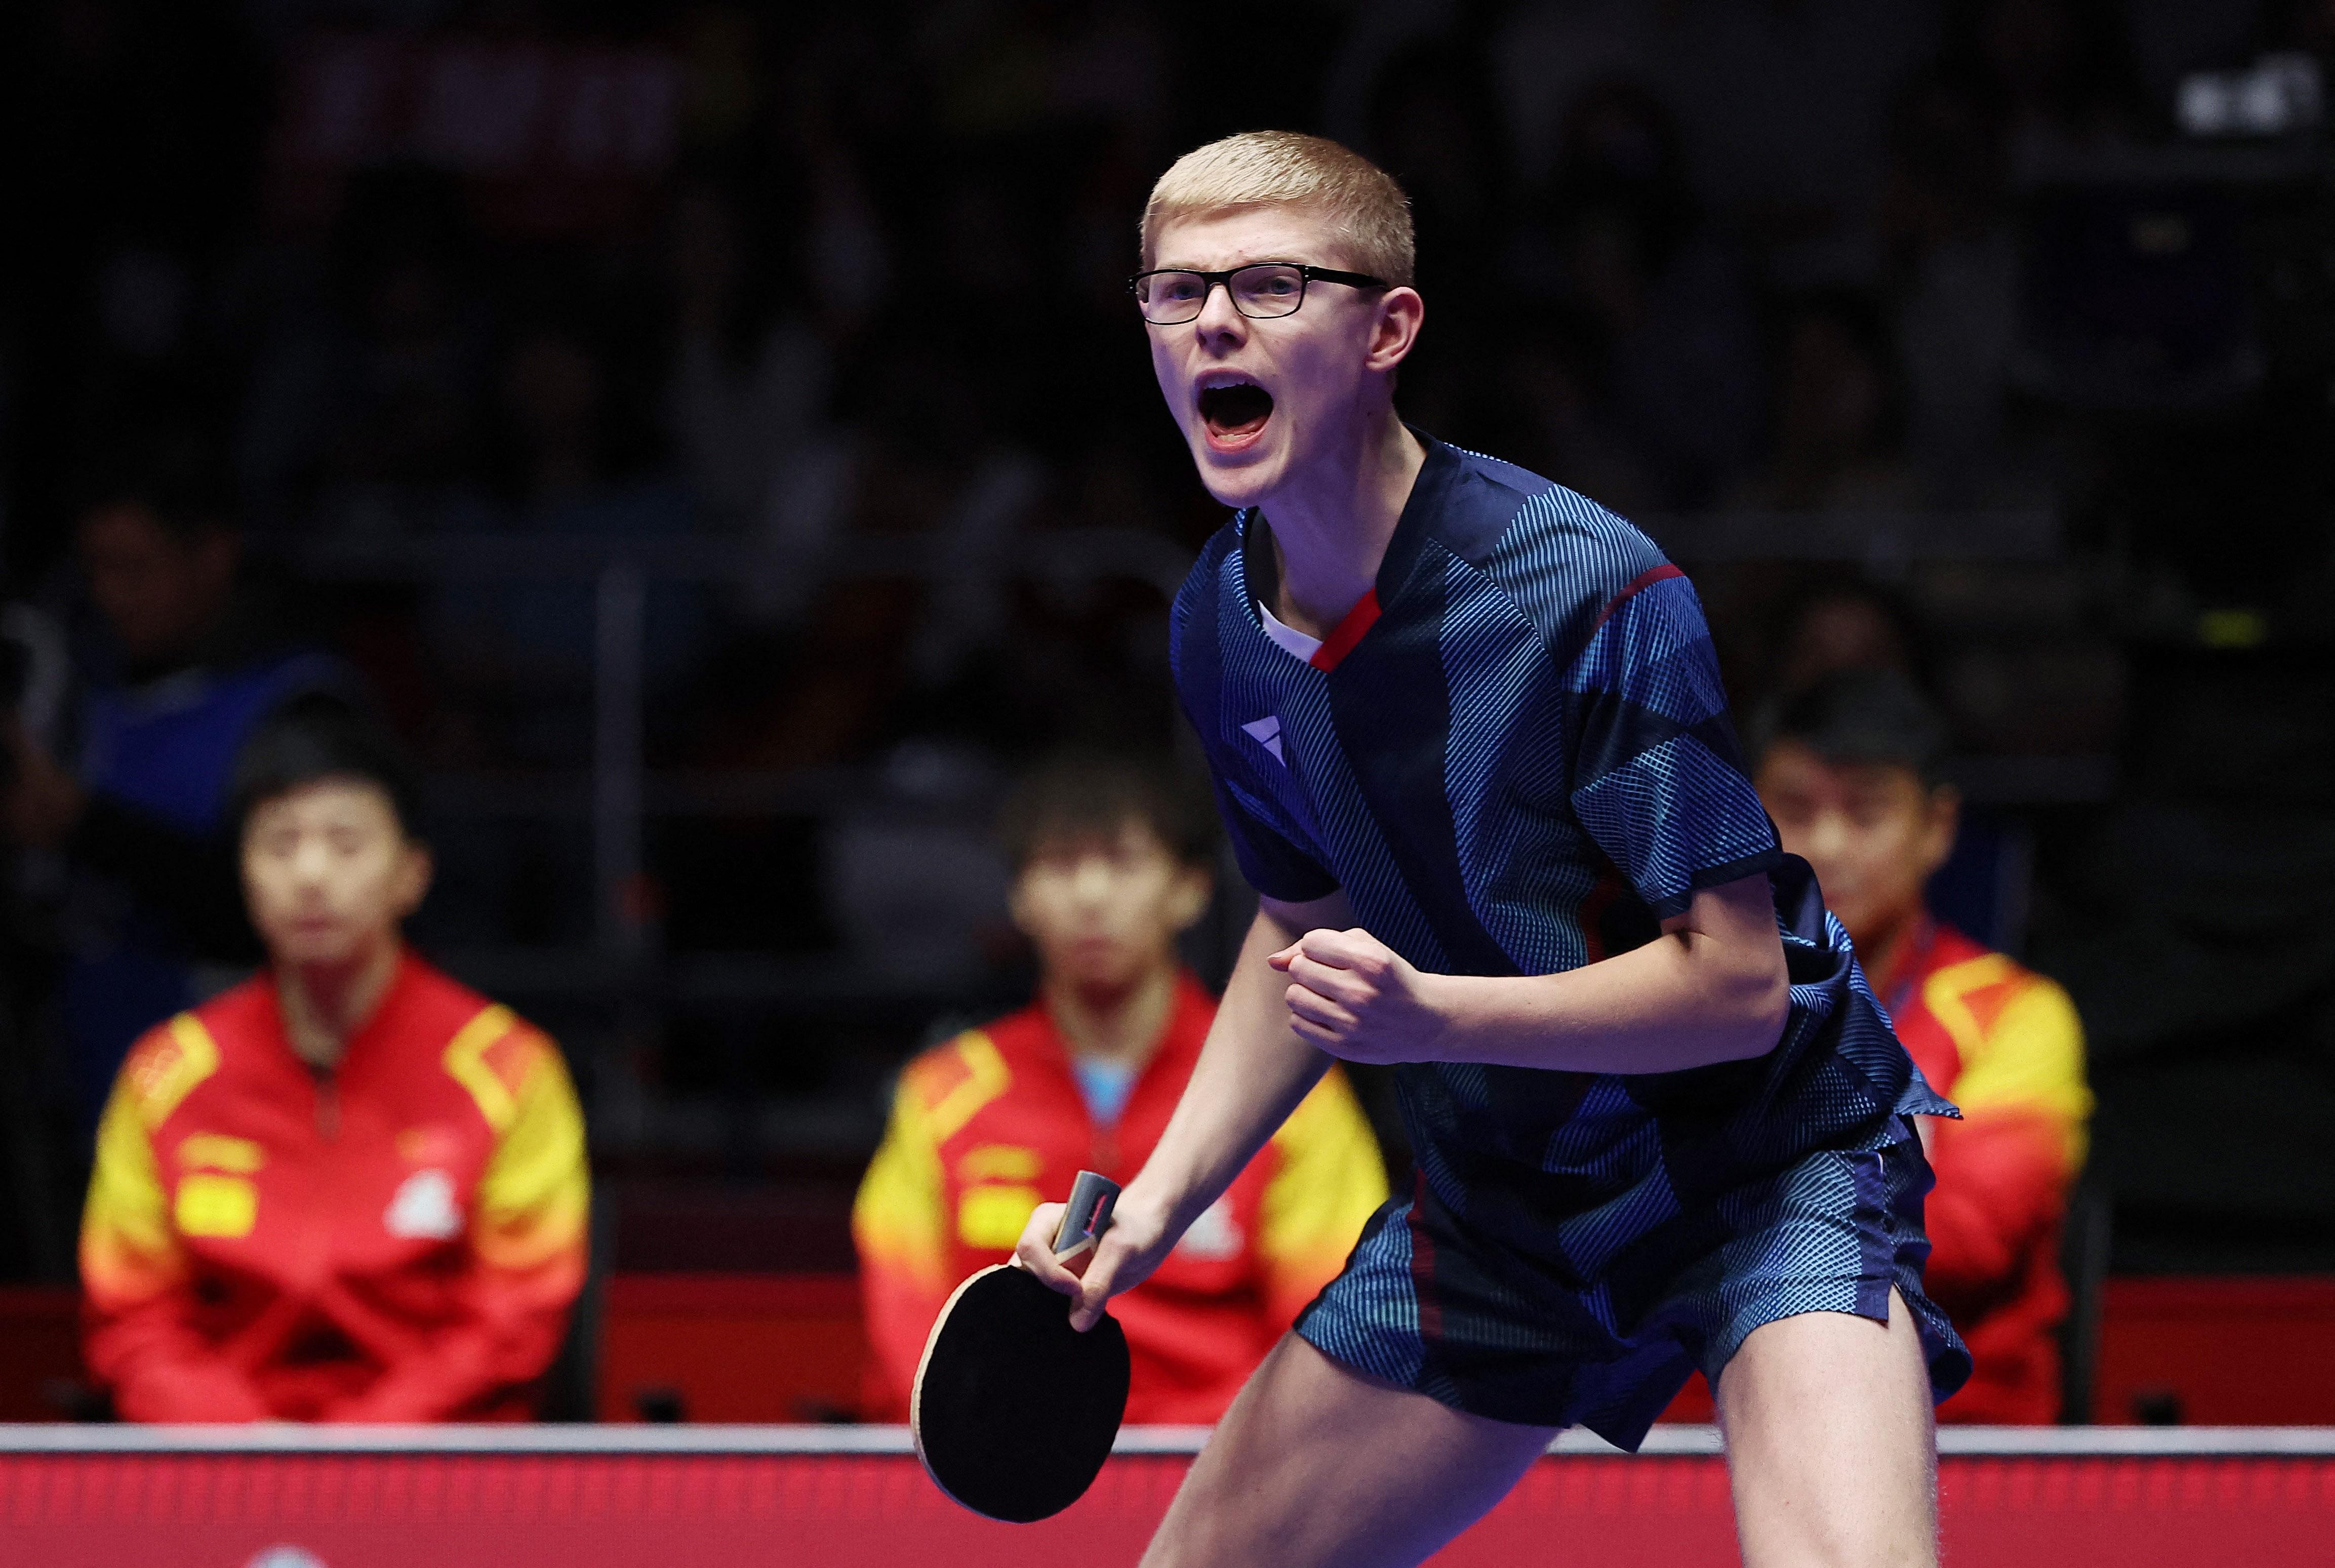 Table tennis wunderkind Felix Lebrun creating a spectacle at Singapore Smash